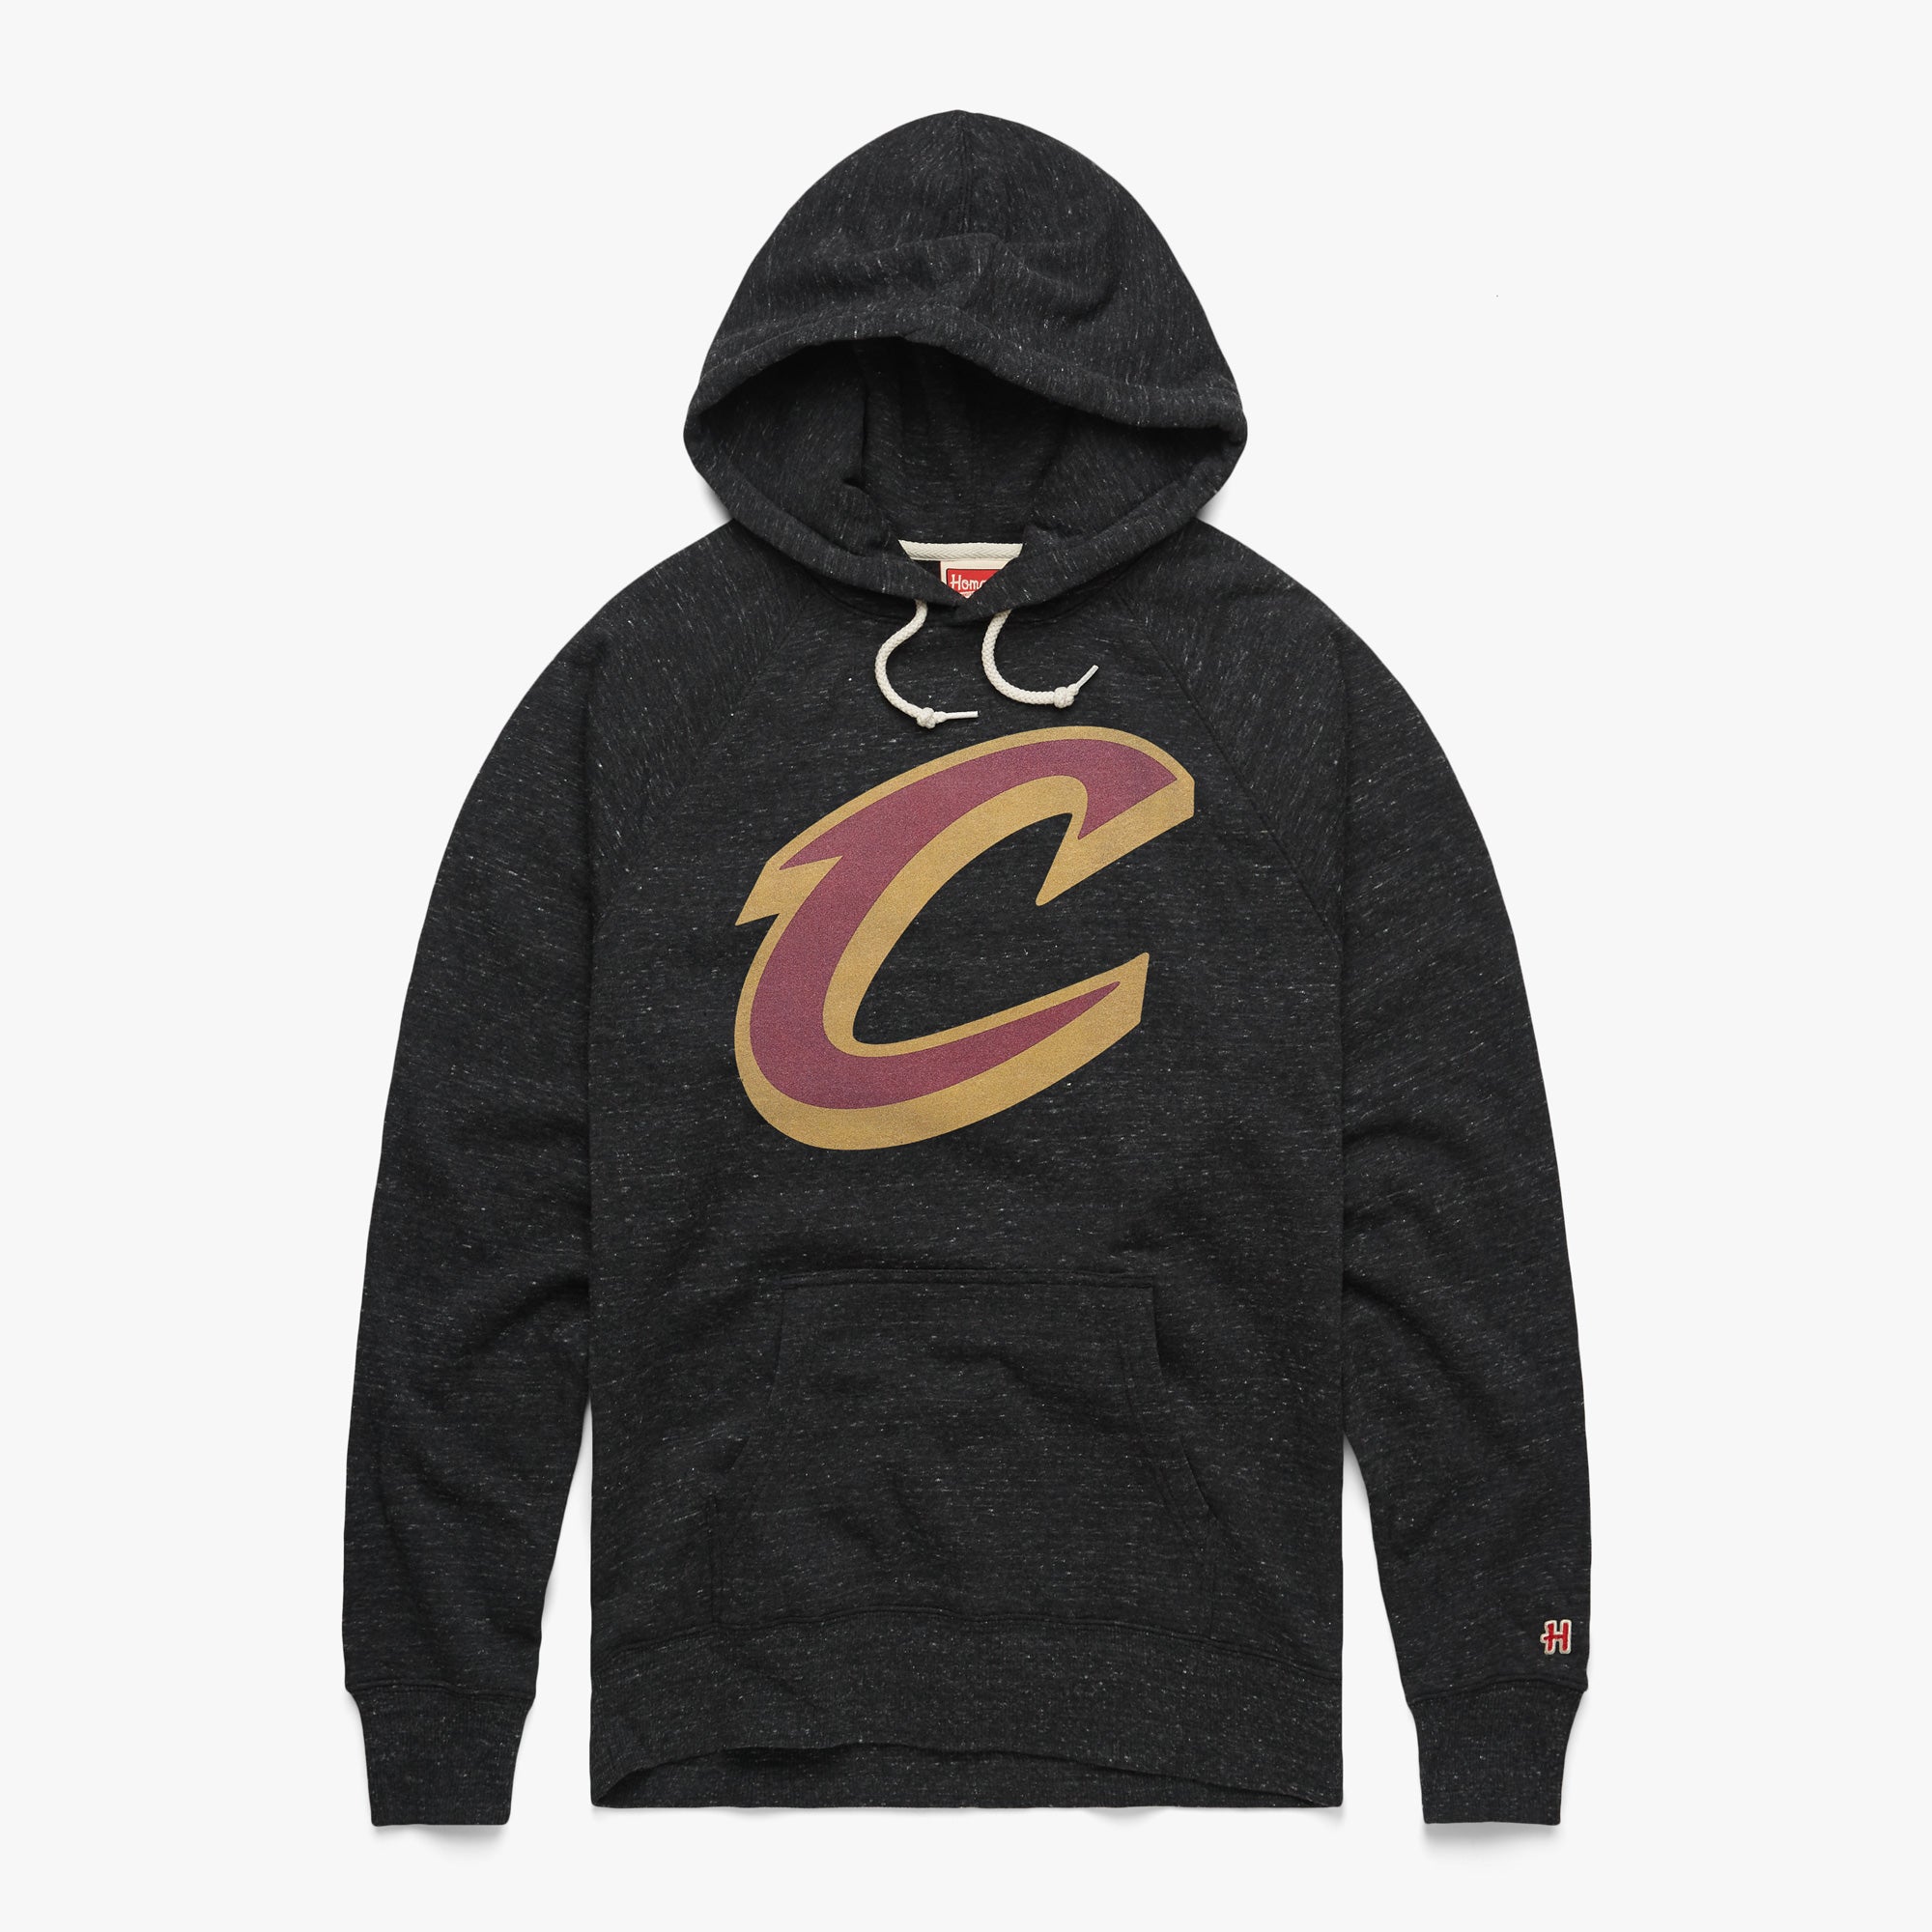 Cleveland Cavaliers Logo Hoodie from Homage. | Charcoal | Cleveland Cavaliers Vintage Apparel from Homage.